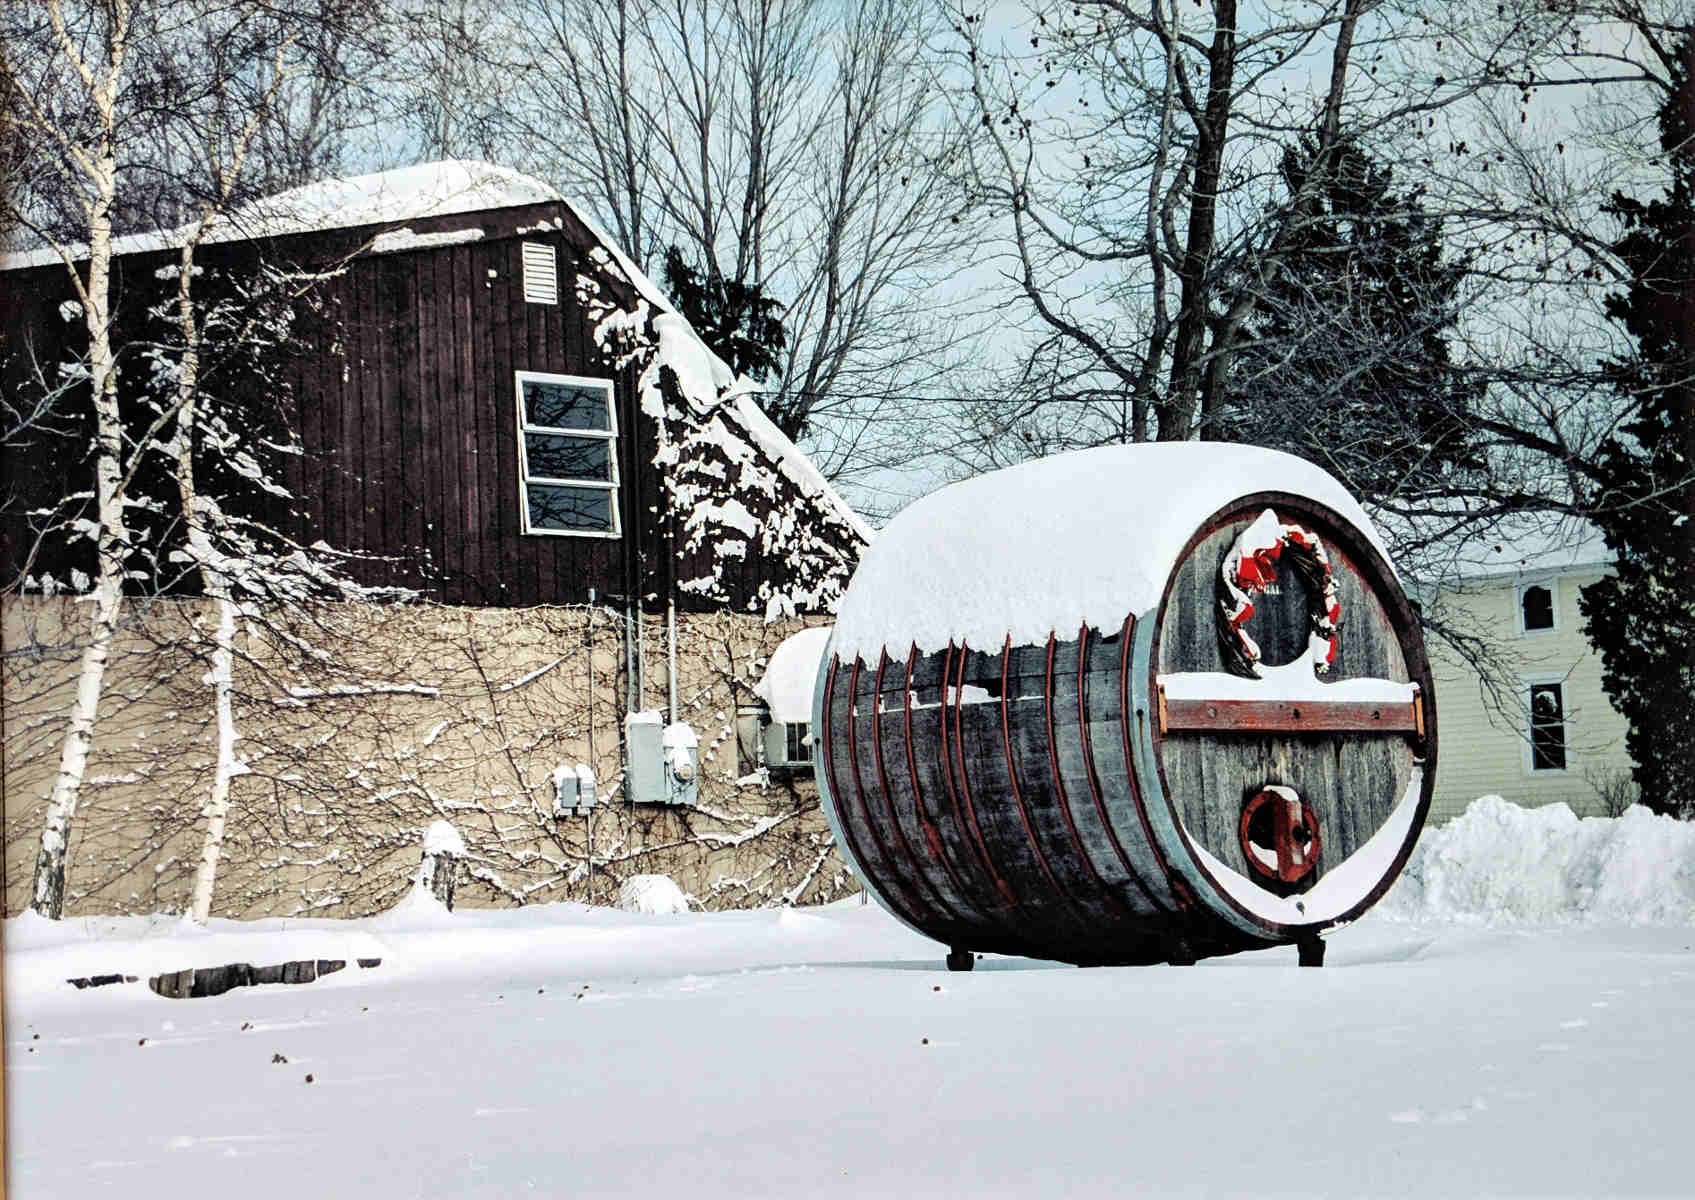 Wine cask in front of the winery, in snow with Christmas decorations